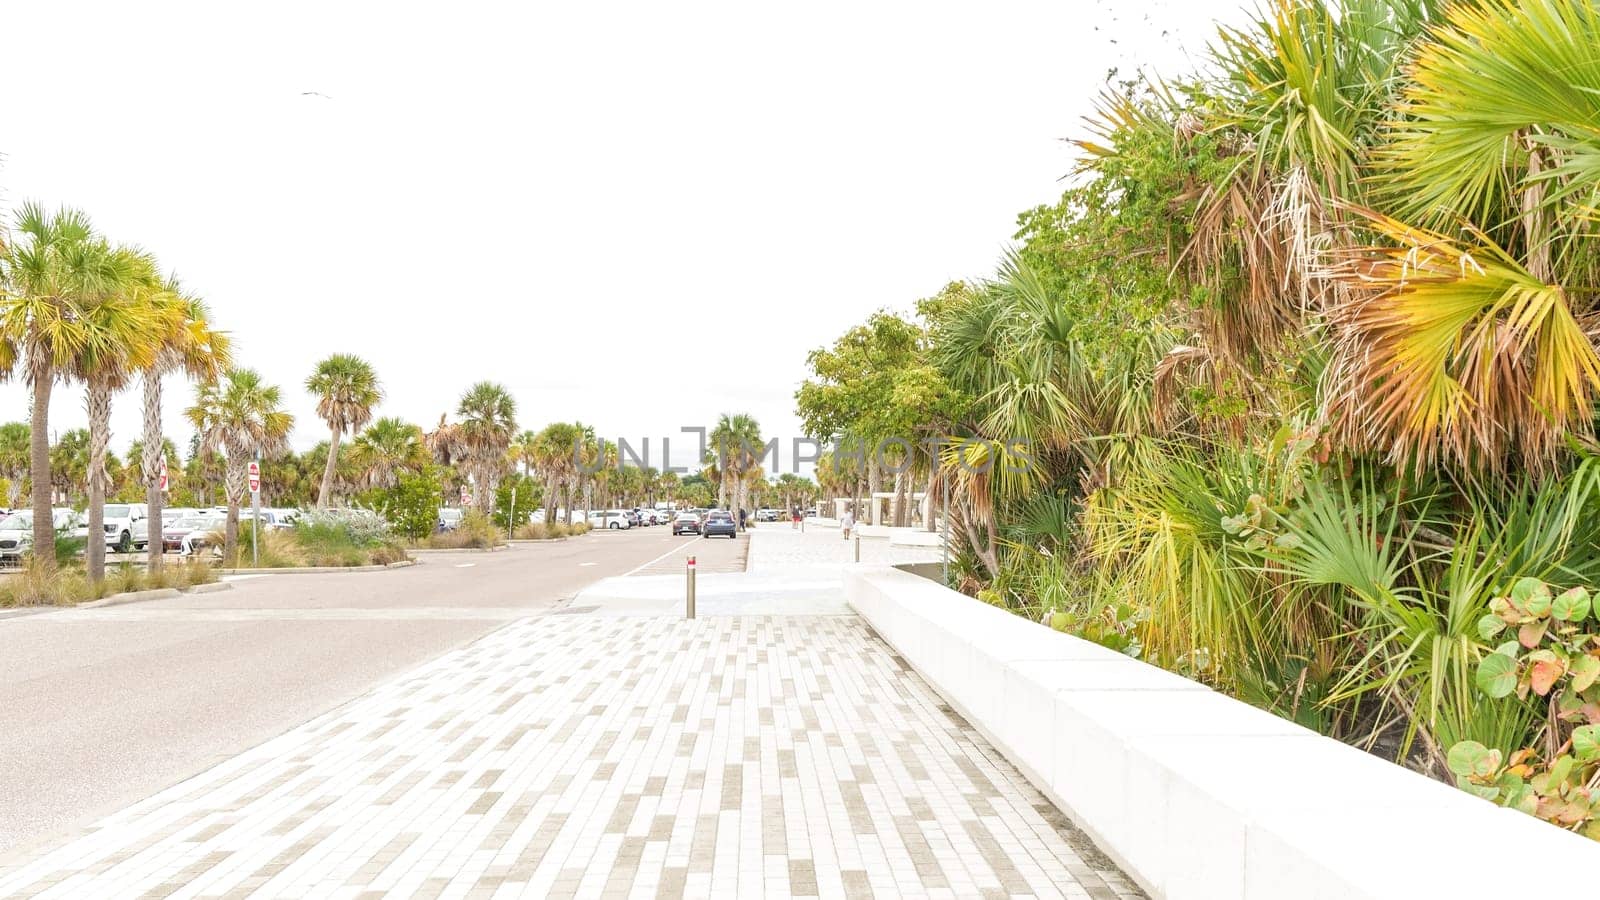 The parks paved pathway is perfect for strolling and enjoying the tropical scenery. Lined with palm trees, it offers shade and a relaxing atmosphere for pedestrians and cyclists.